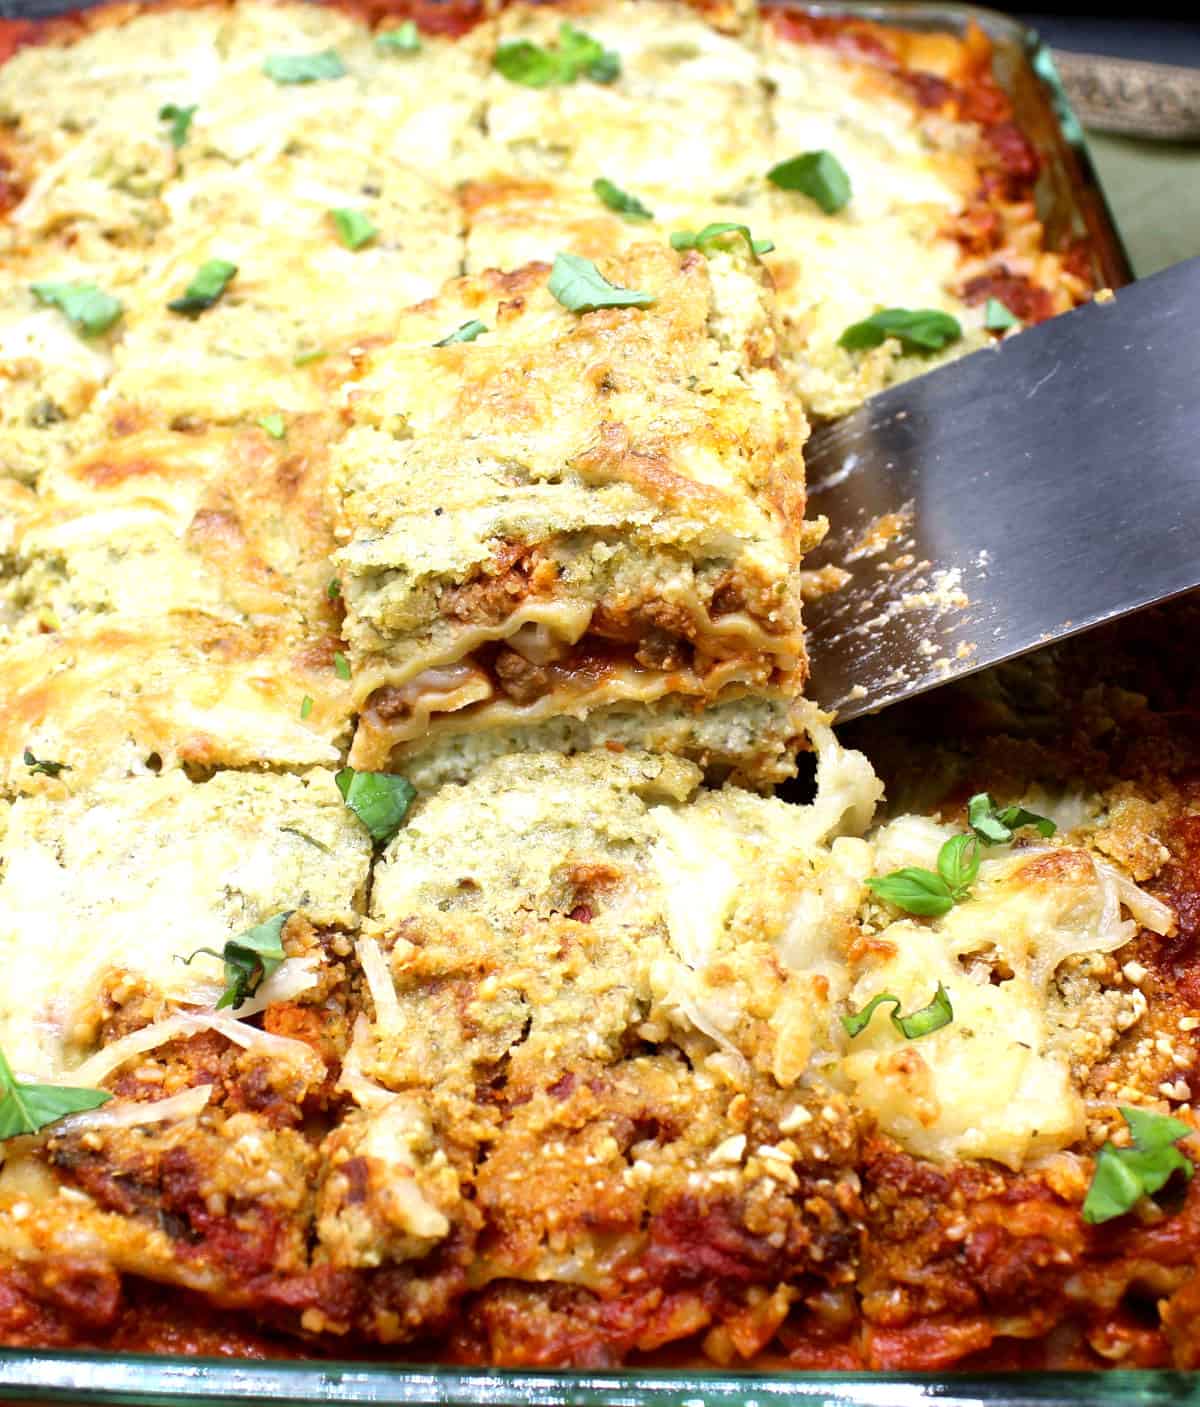 The best vegan lasagna being lifted out of the baking pan with a steel spatula.